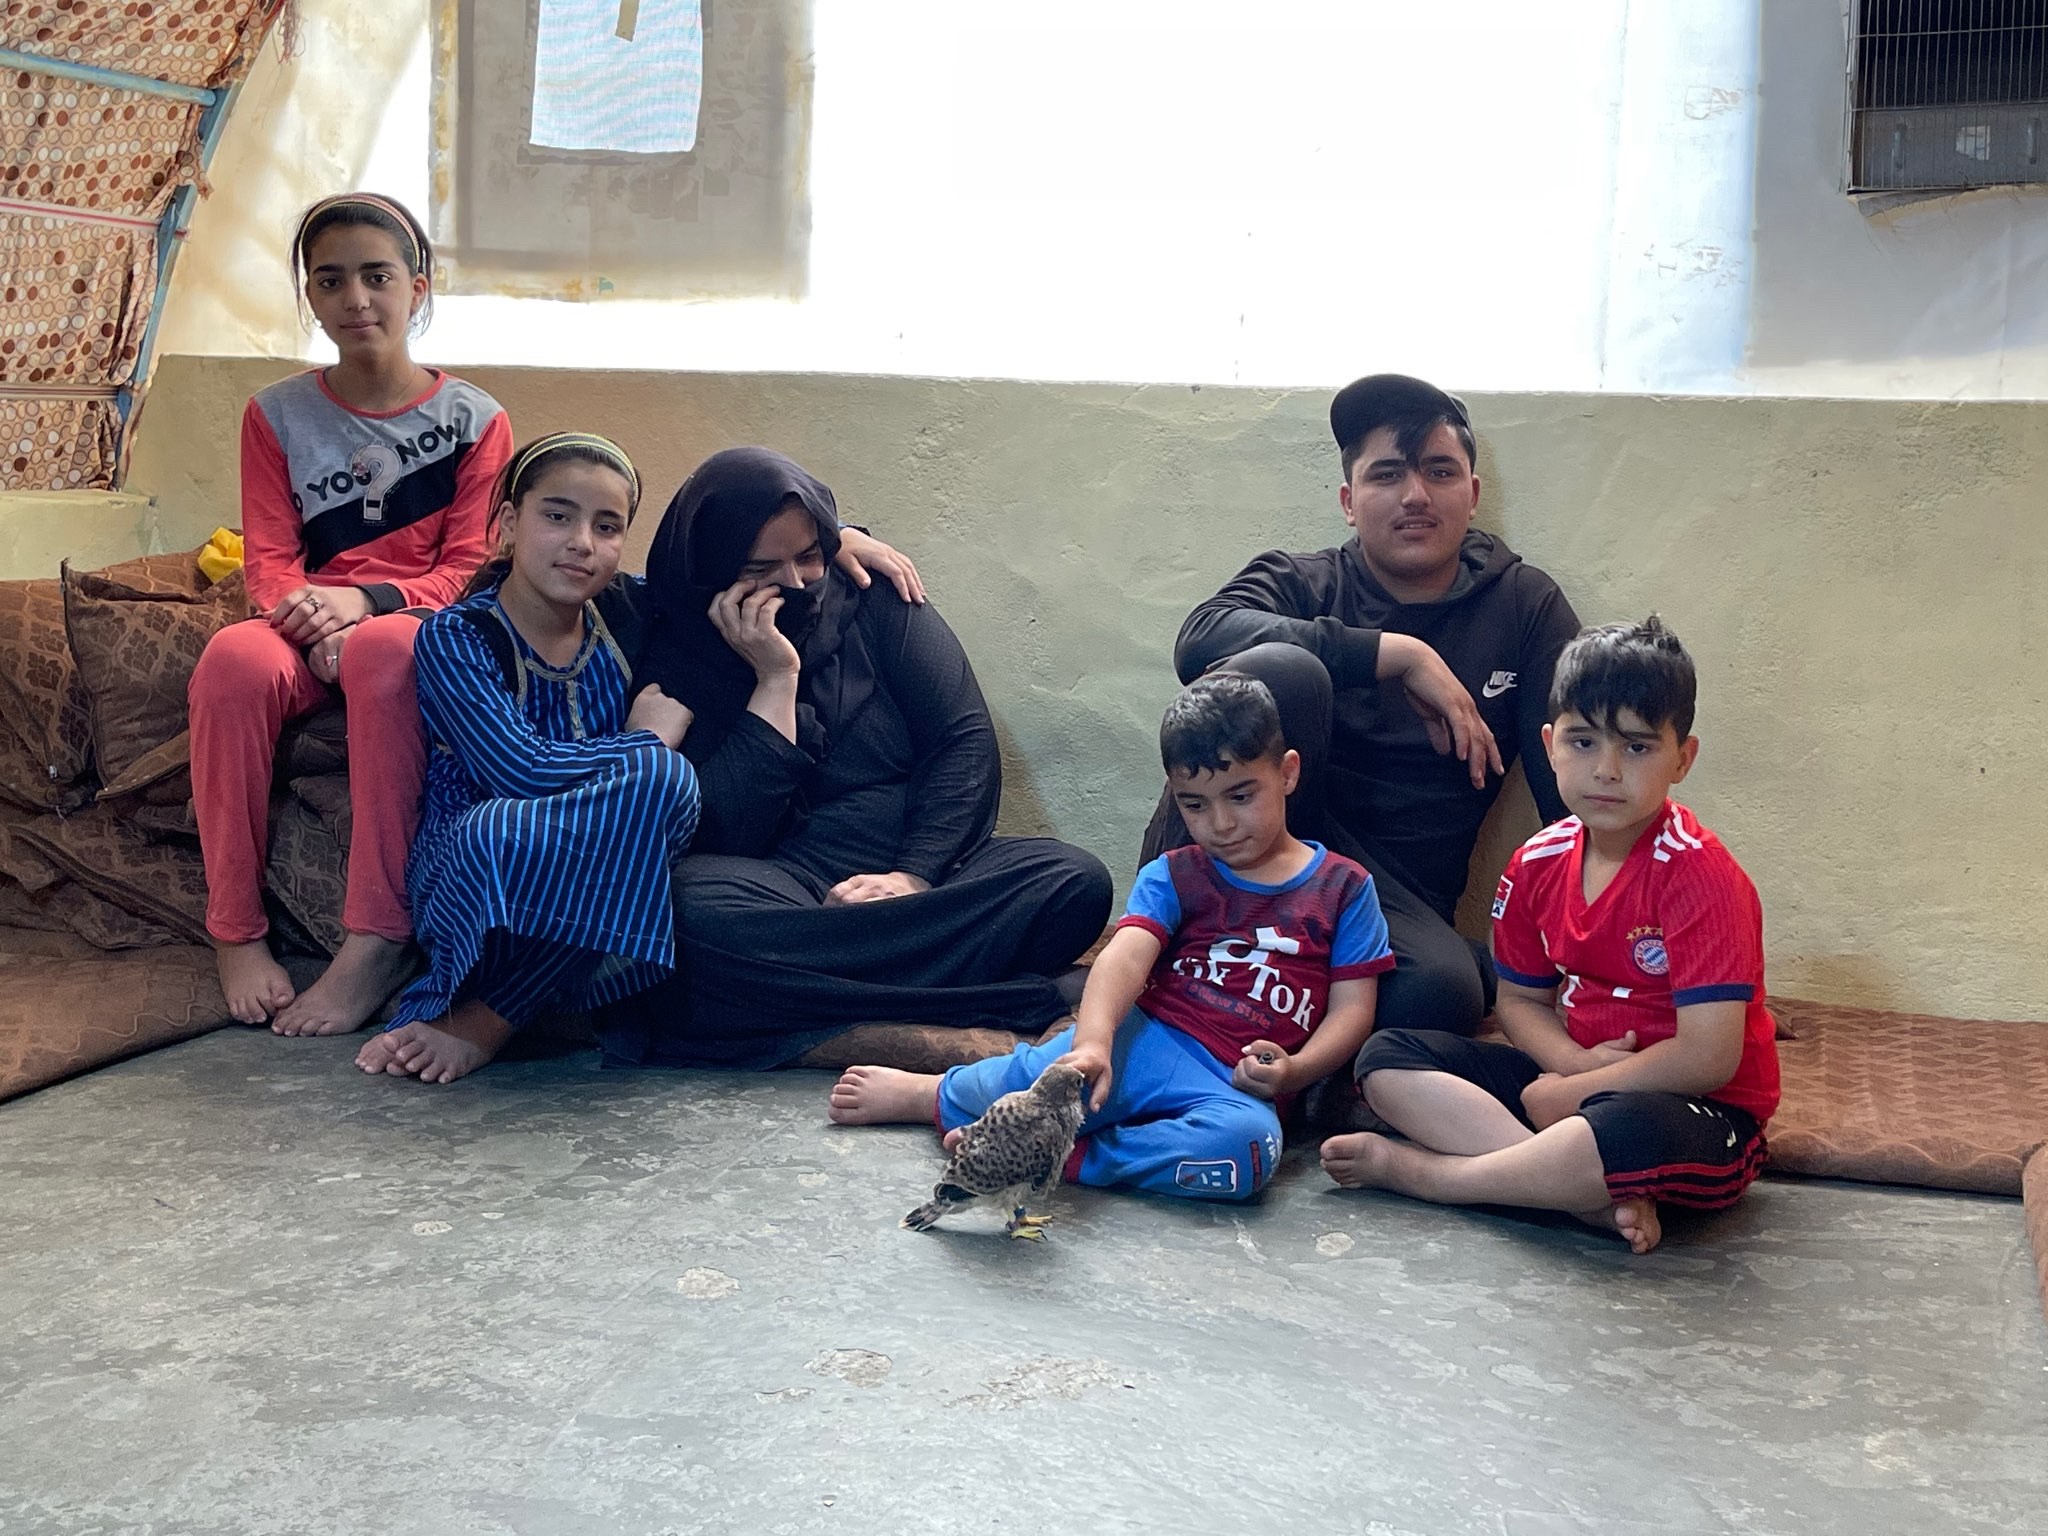 18 years old Falah and his family from Iraq fled from home due to the conflict with ISIL